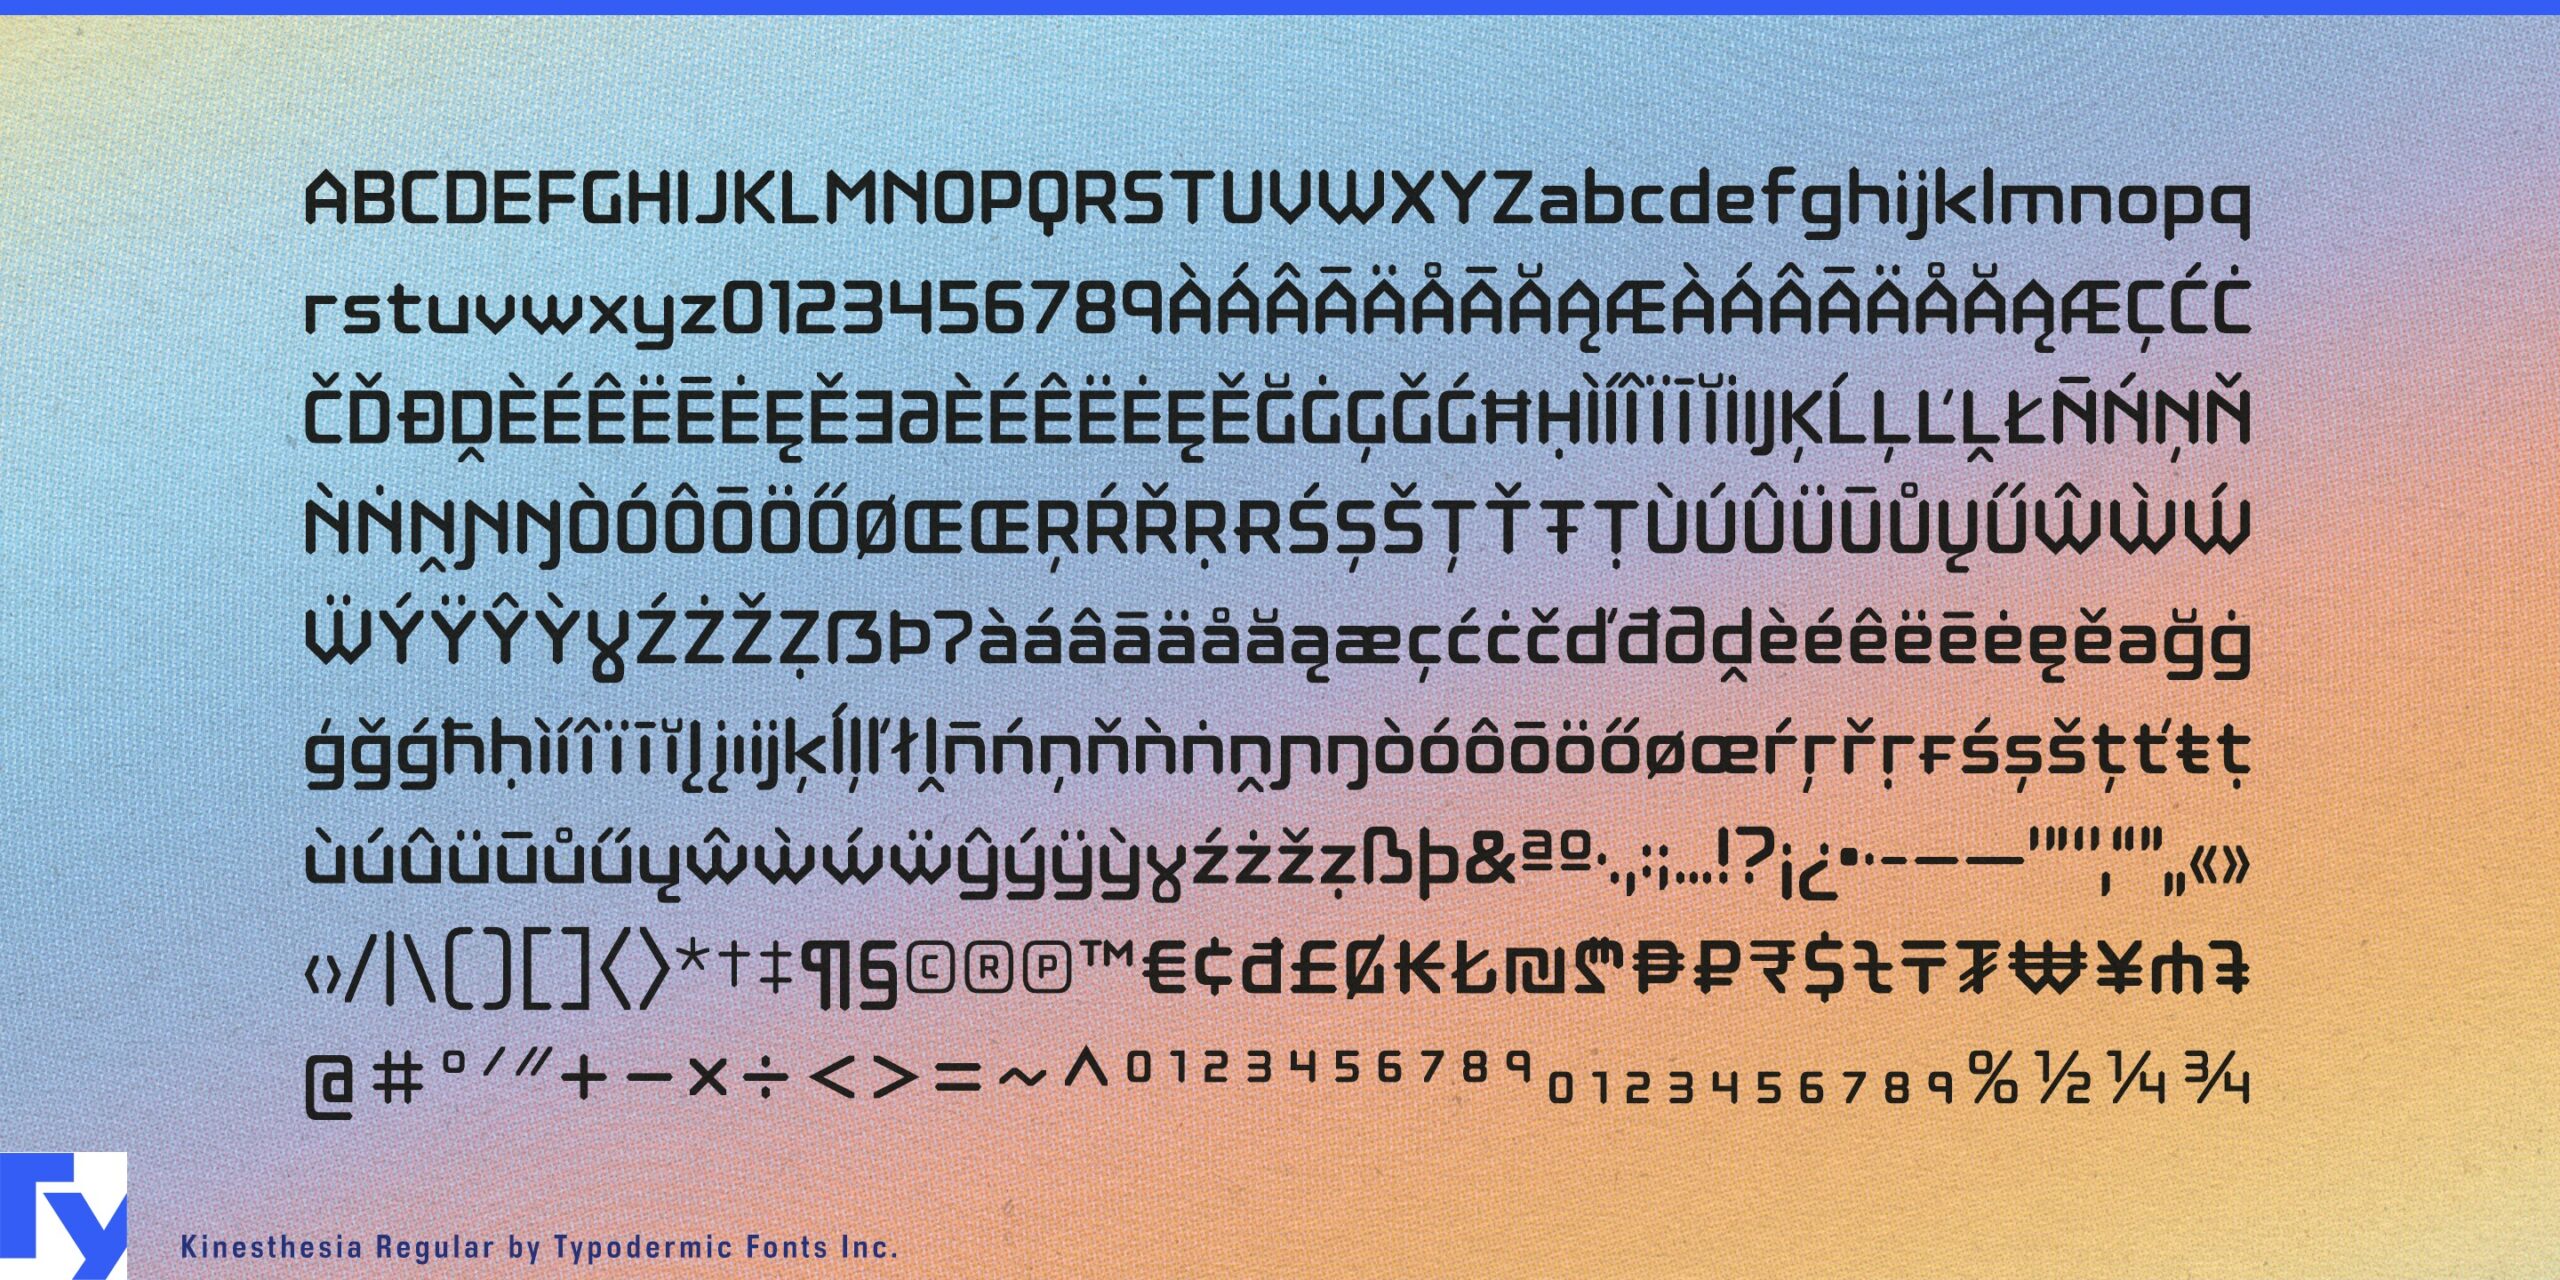 Unmistakable Edge: Kinesthesia Typeface Commands Attention